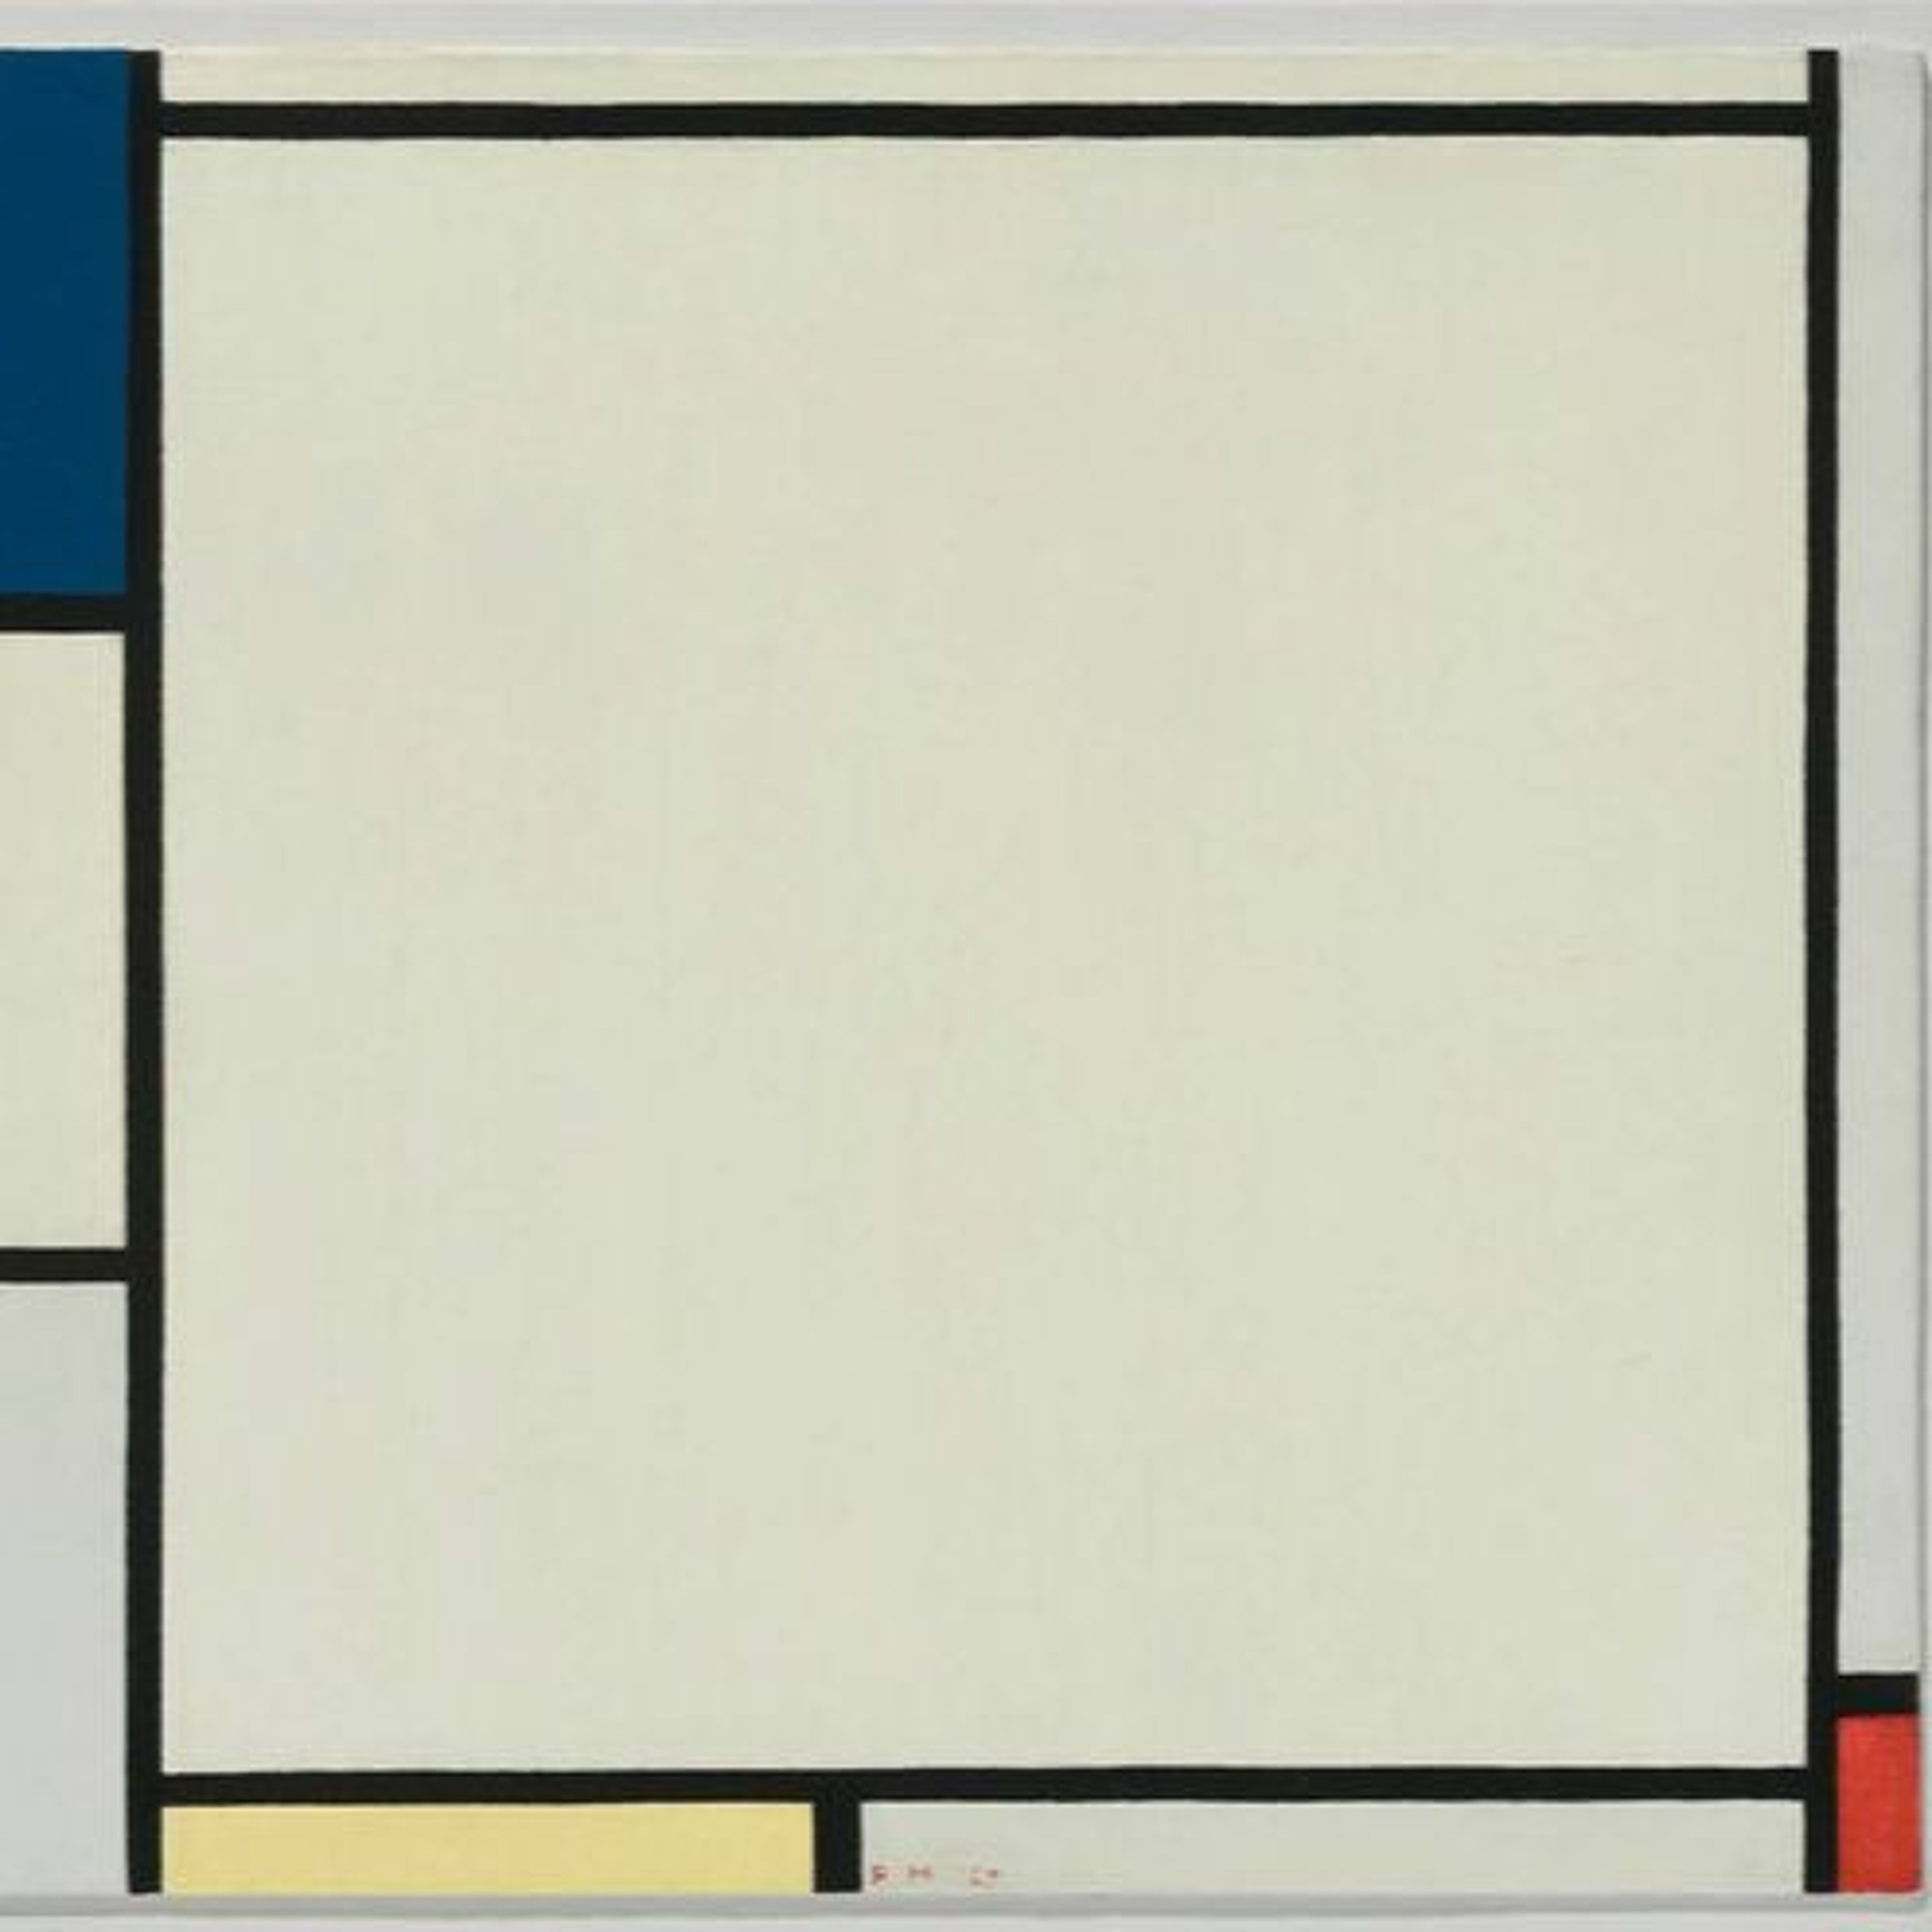 Ep. 10 - Piet Mondrian's "Composition with Red, Yellow, and Blue" (1927)